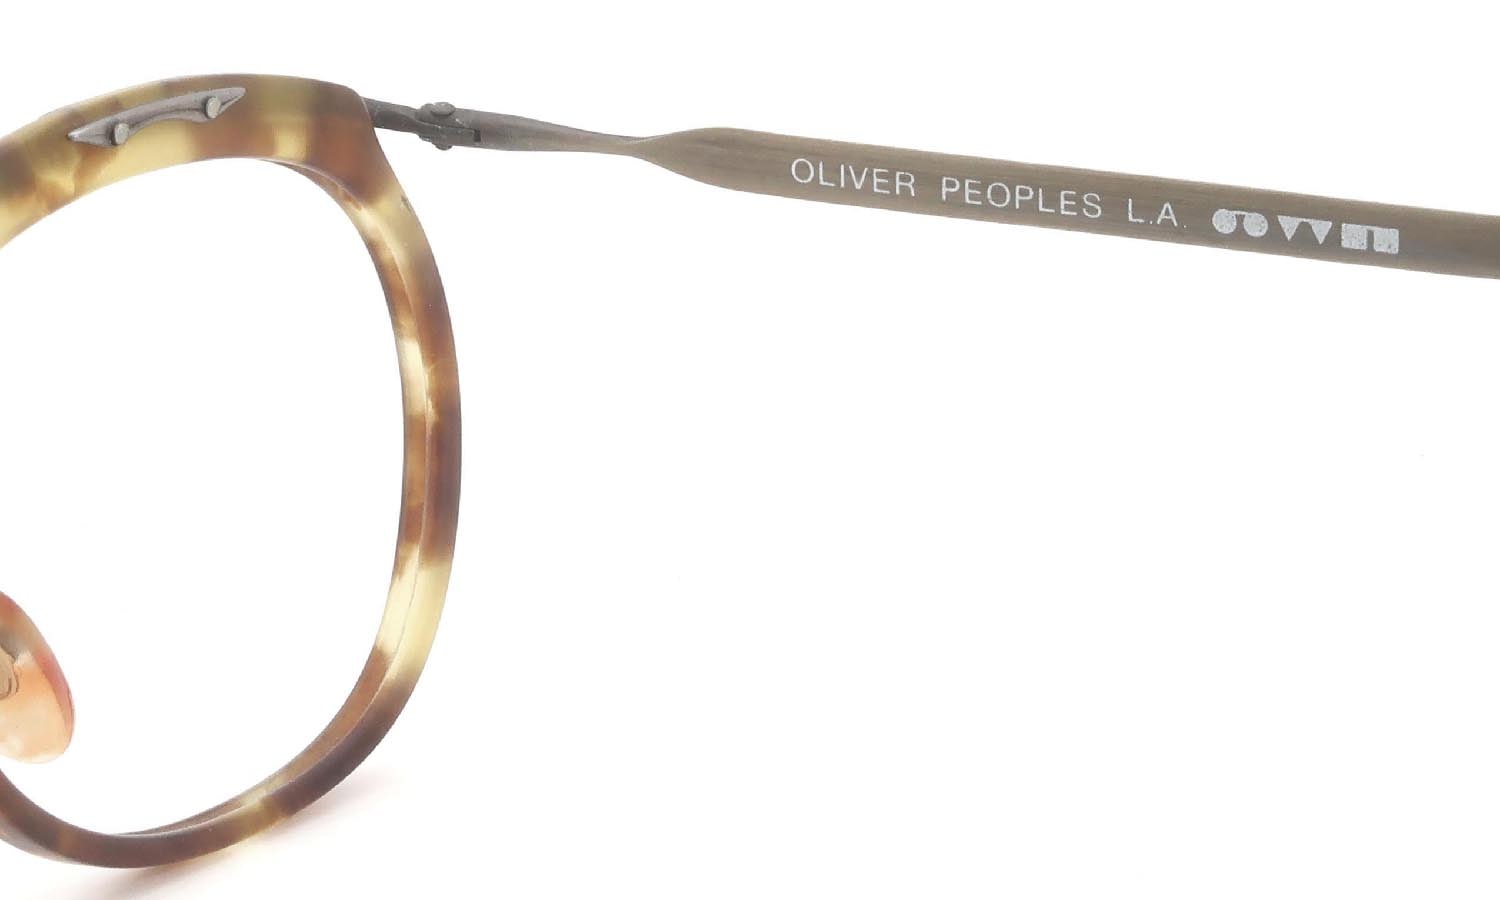 OLIVER PEOPLES archive 推定1990年代 1933 404-AG